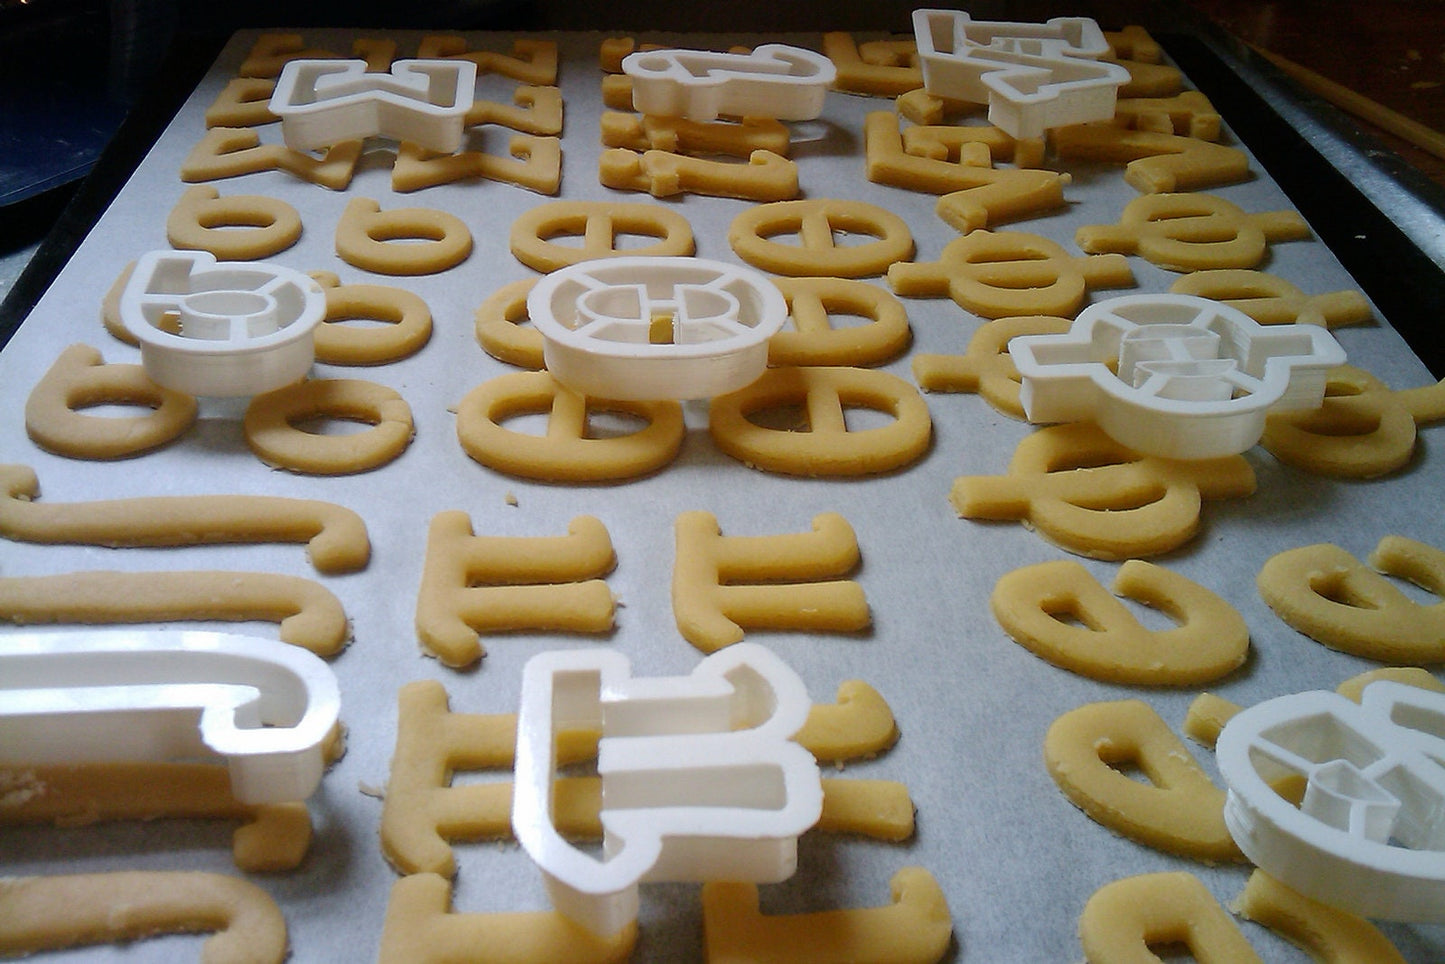 Math Cookie Cutter set gift for nerd teachers and engineers